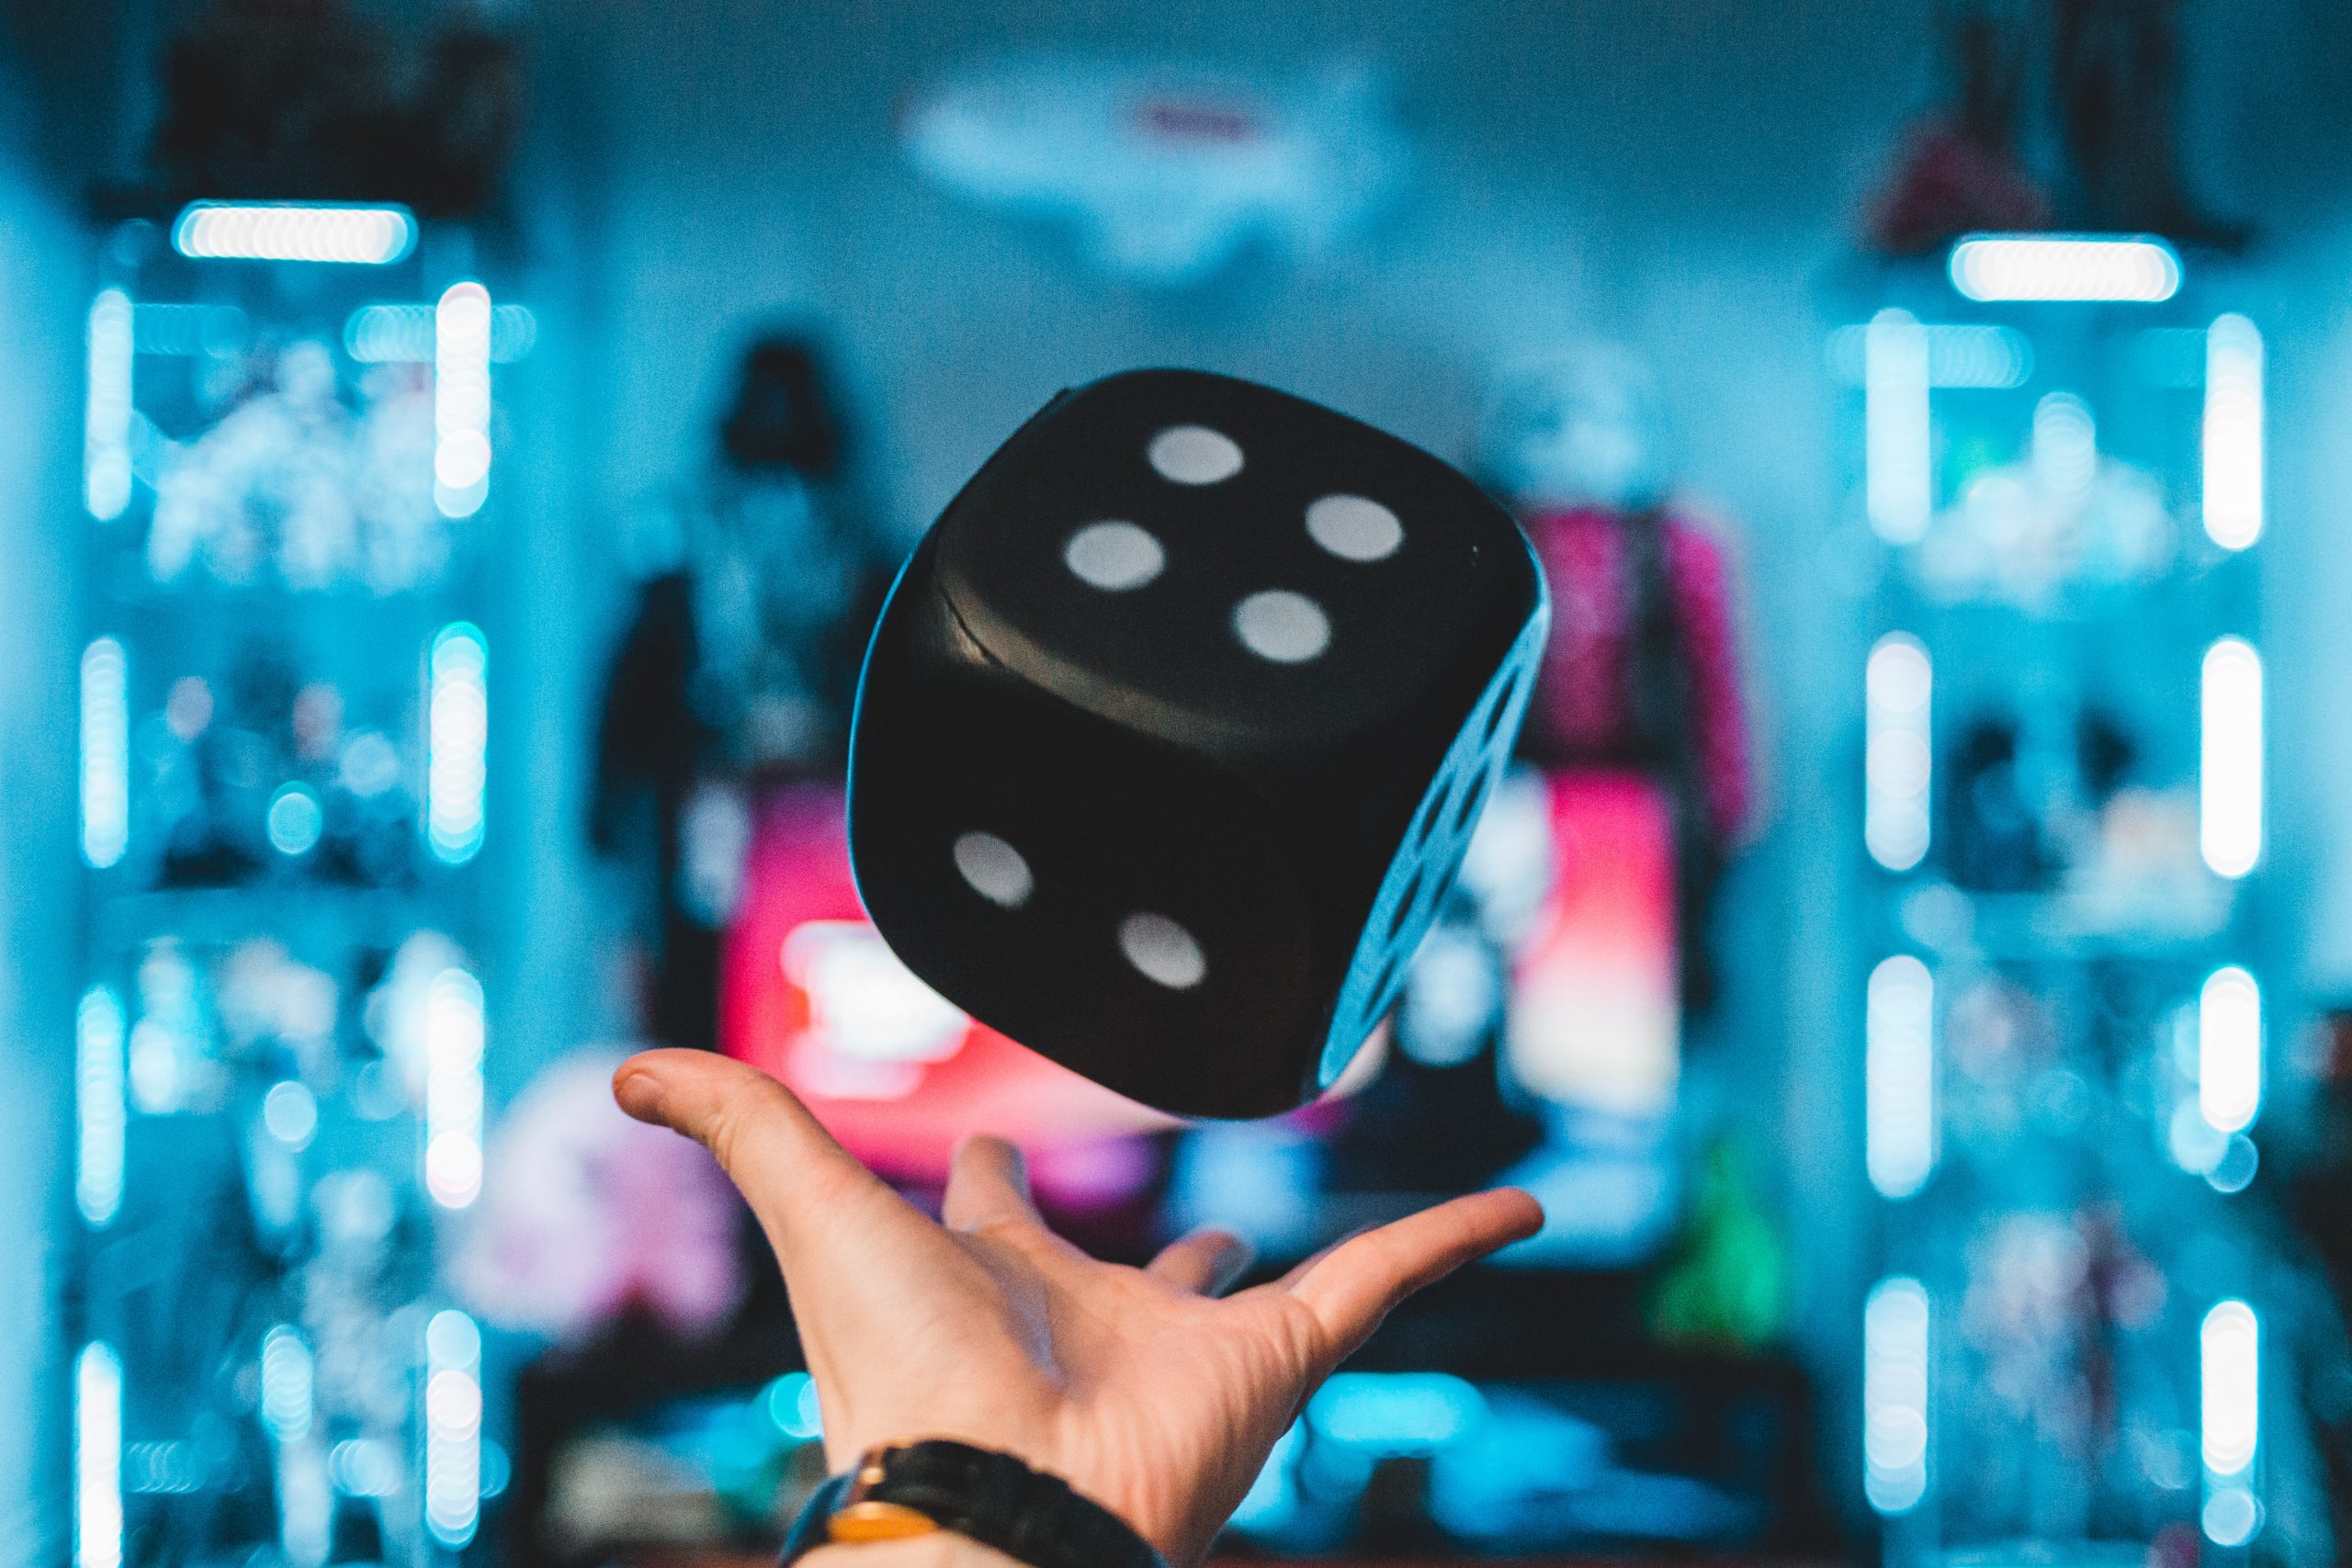 in article about licensed gambling operators, a hand throwing up an oversized dice